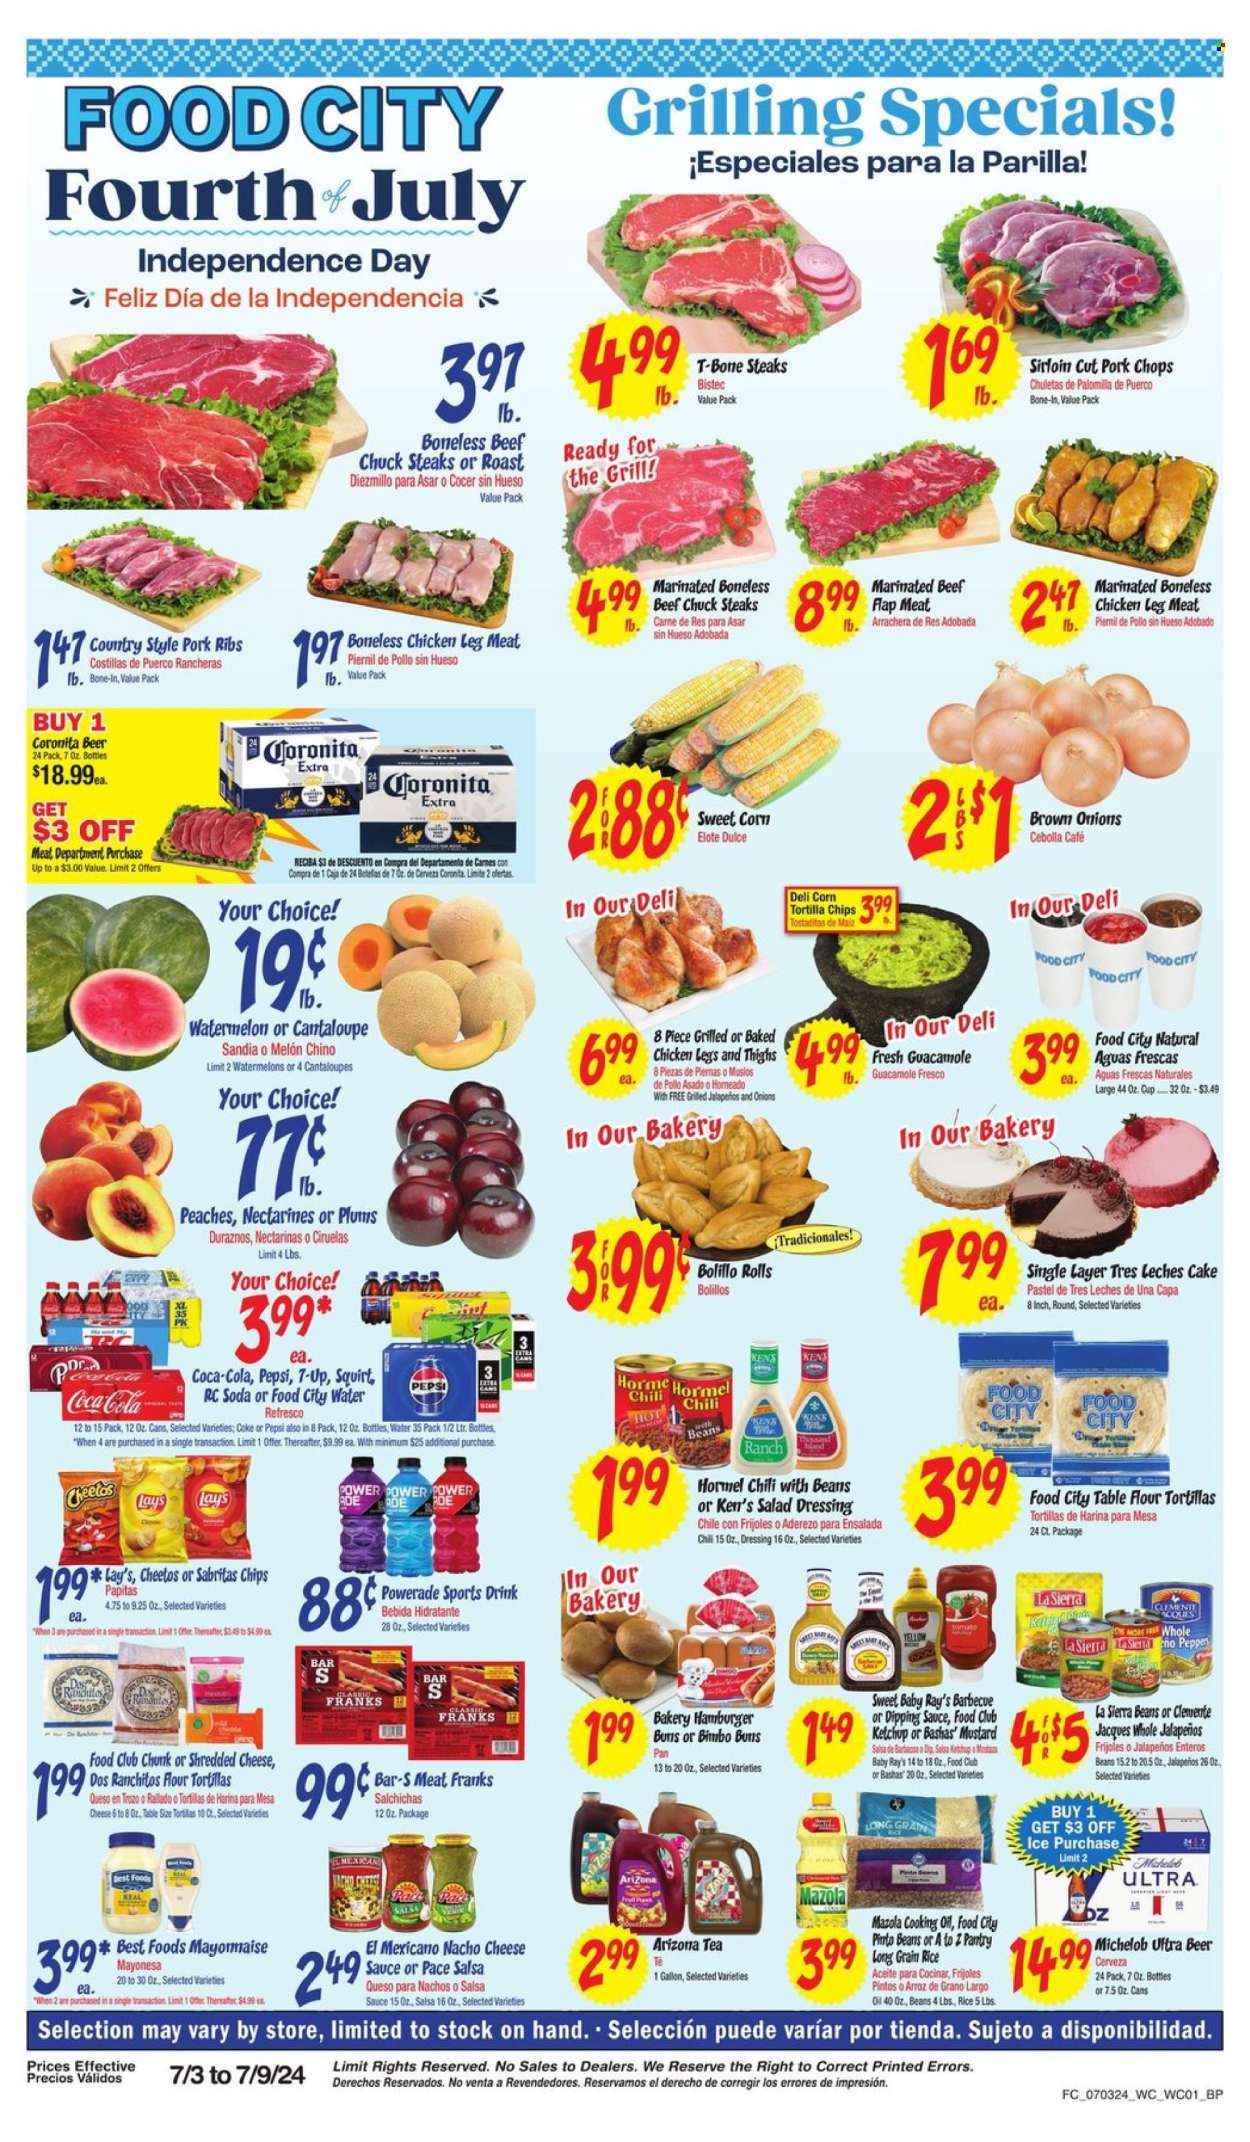 thumbnail - Food City Flyer - 07/03/2024 - 07/09/2024 - Sales products - corn tortillas, tortillas, dinner rolls, buns, burger buns, flour tortillas, peppers, jalapeño, sweet corn, nectarines, watermelon, plums, melons, peaches, Hormel, roast, ready meal, frankfurters, guacamole, shredded cheese, chunk cheese, dip, tortilla chips, Cheetos, Lay’s, salty snack, pinto beans, chili beans, rice, long grain rice, BBQ sauce, mustard, salad dressing, ketchup, dressing, sauce, oil, cooking oil, Coca-Cola, Powerade, Pepsi, energy drink, fruit drink, ice tea, soft drink, 7UP, AriZona, Coke, electrolyte drink, soda, water, carbonated soft drink, alcohol, beer, chicken legs, beef meat, beef steak, t-bone steak, steak, marinated beef, ribs, pork chops, pork meat, pork ribs, pan, cup, Michelob. Page 1.